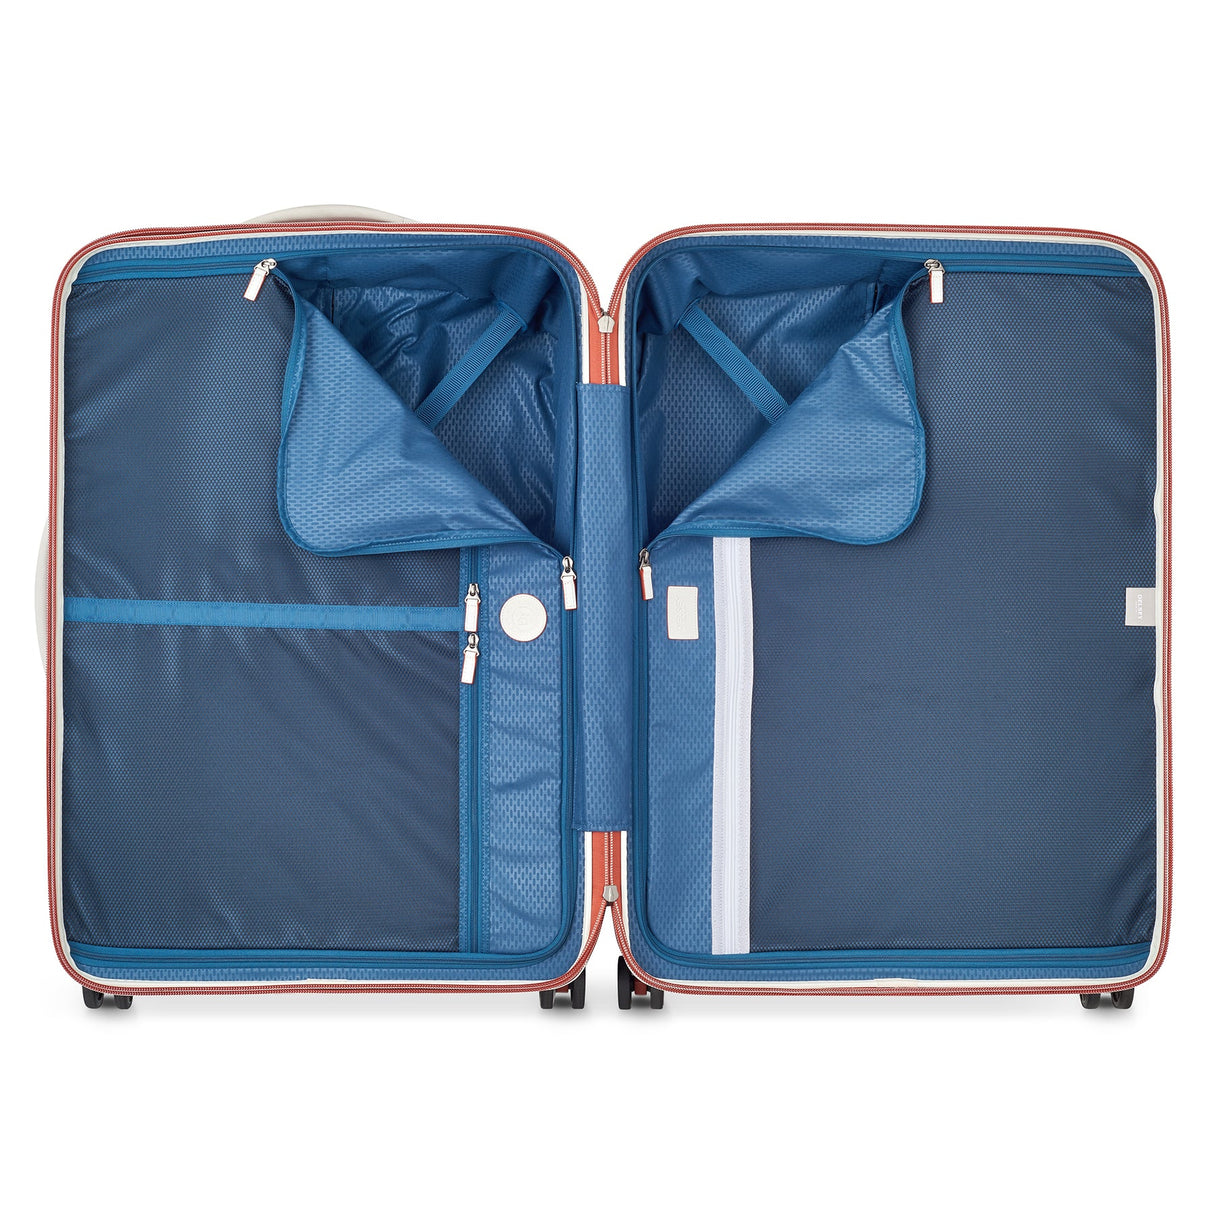 Delsey Chatelet Air 2.0 28" Large Expandable Spinner , , delsey-chatelet-air-2.0-40167682135RG-04_1800x1800_abf2e5e7-40df-4987-9105-4df2e2fea0b1